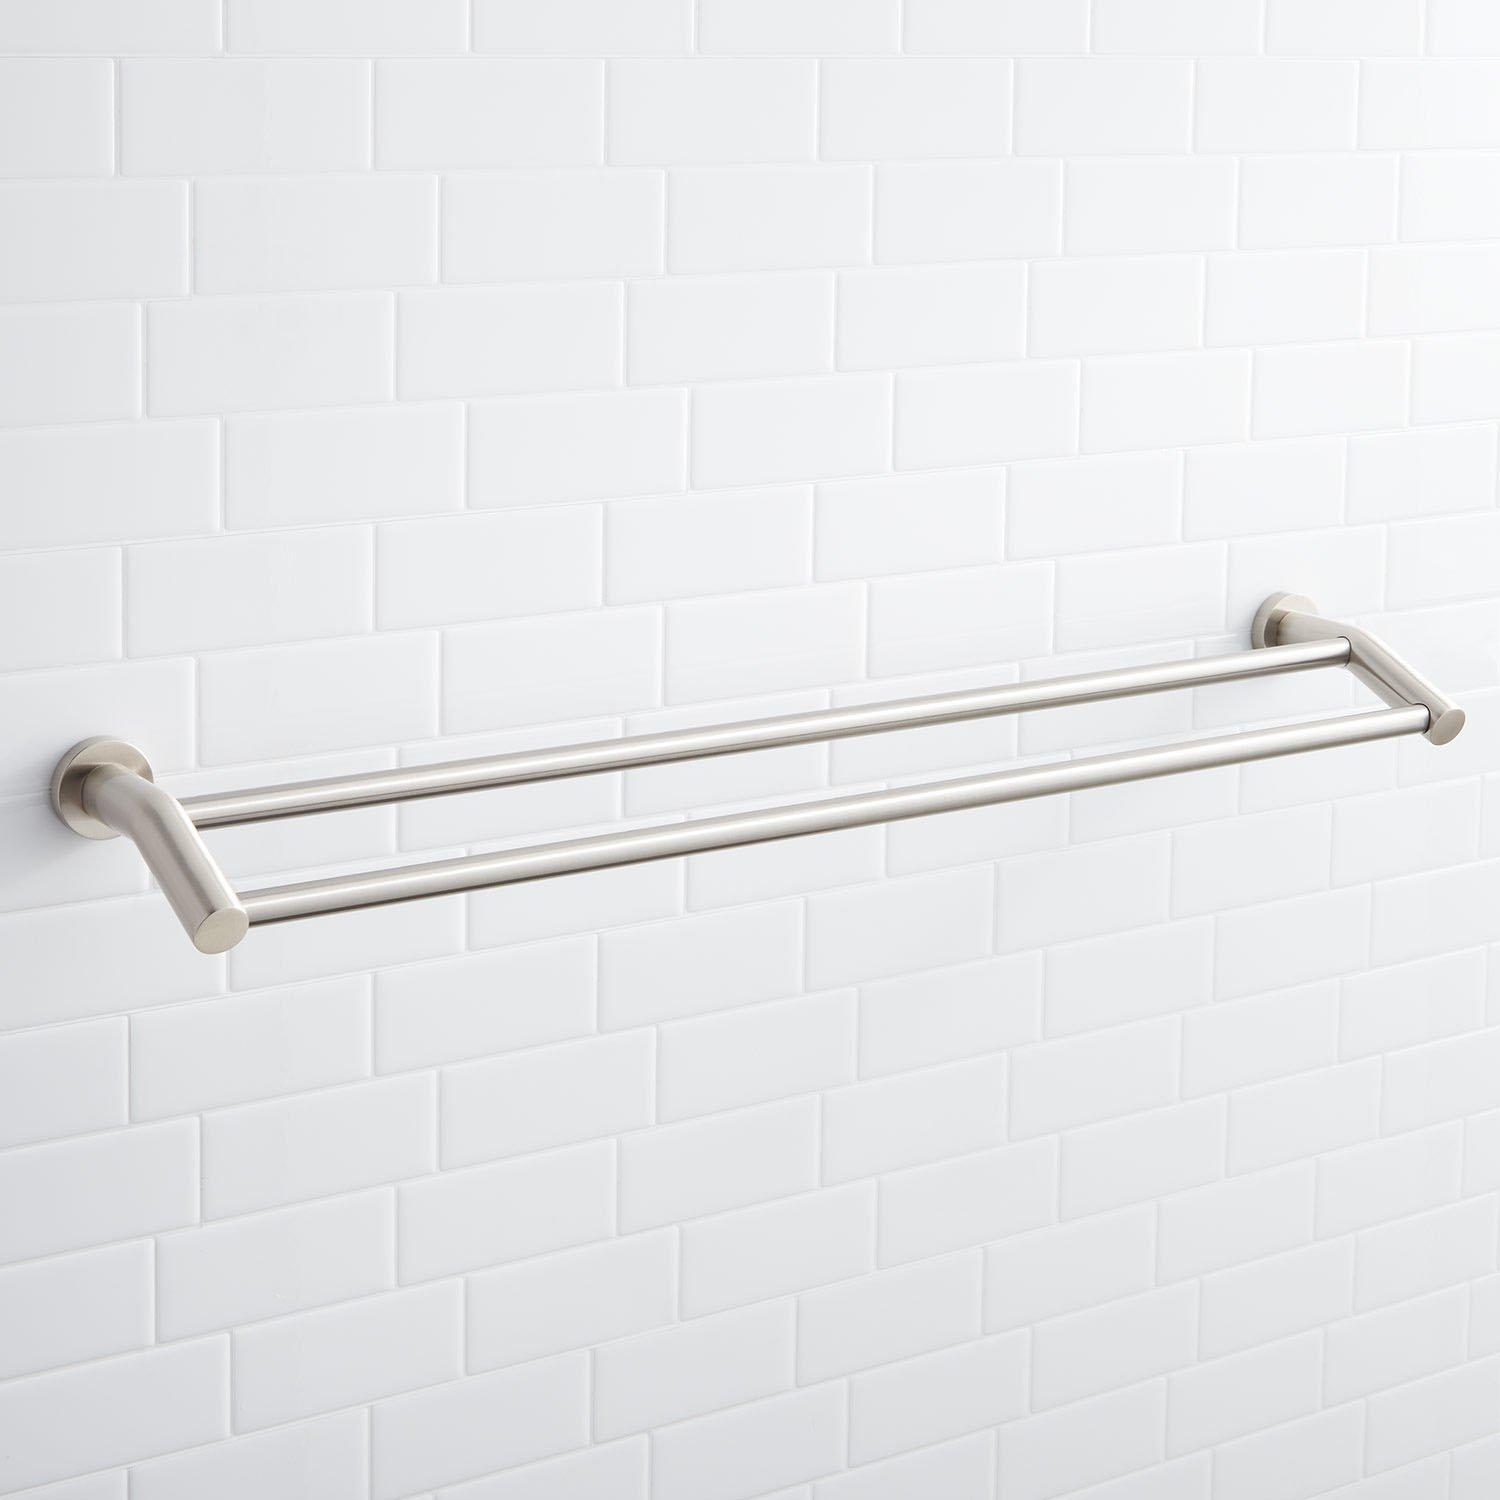 28 Ceeley Collection Double Towel Bar - Brushed Nickel